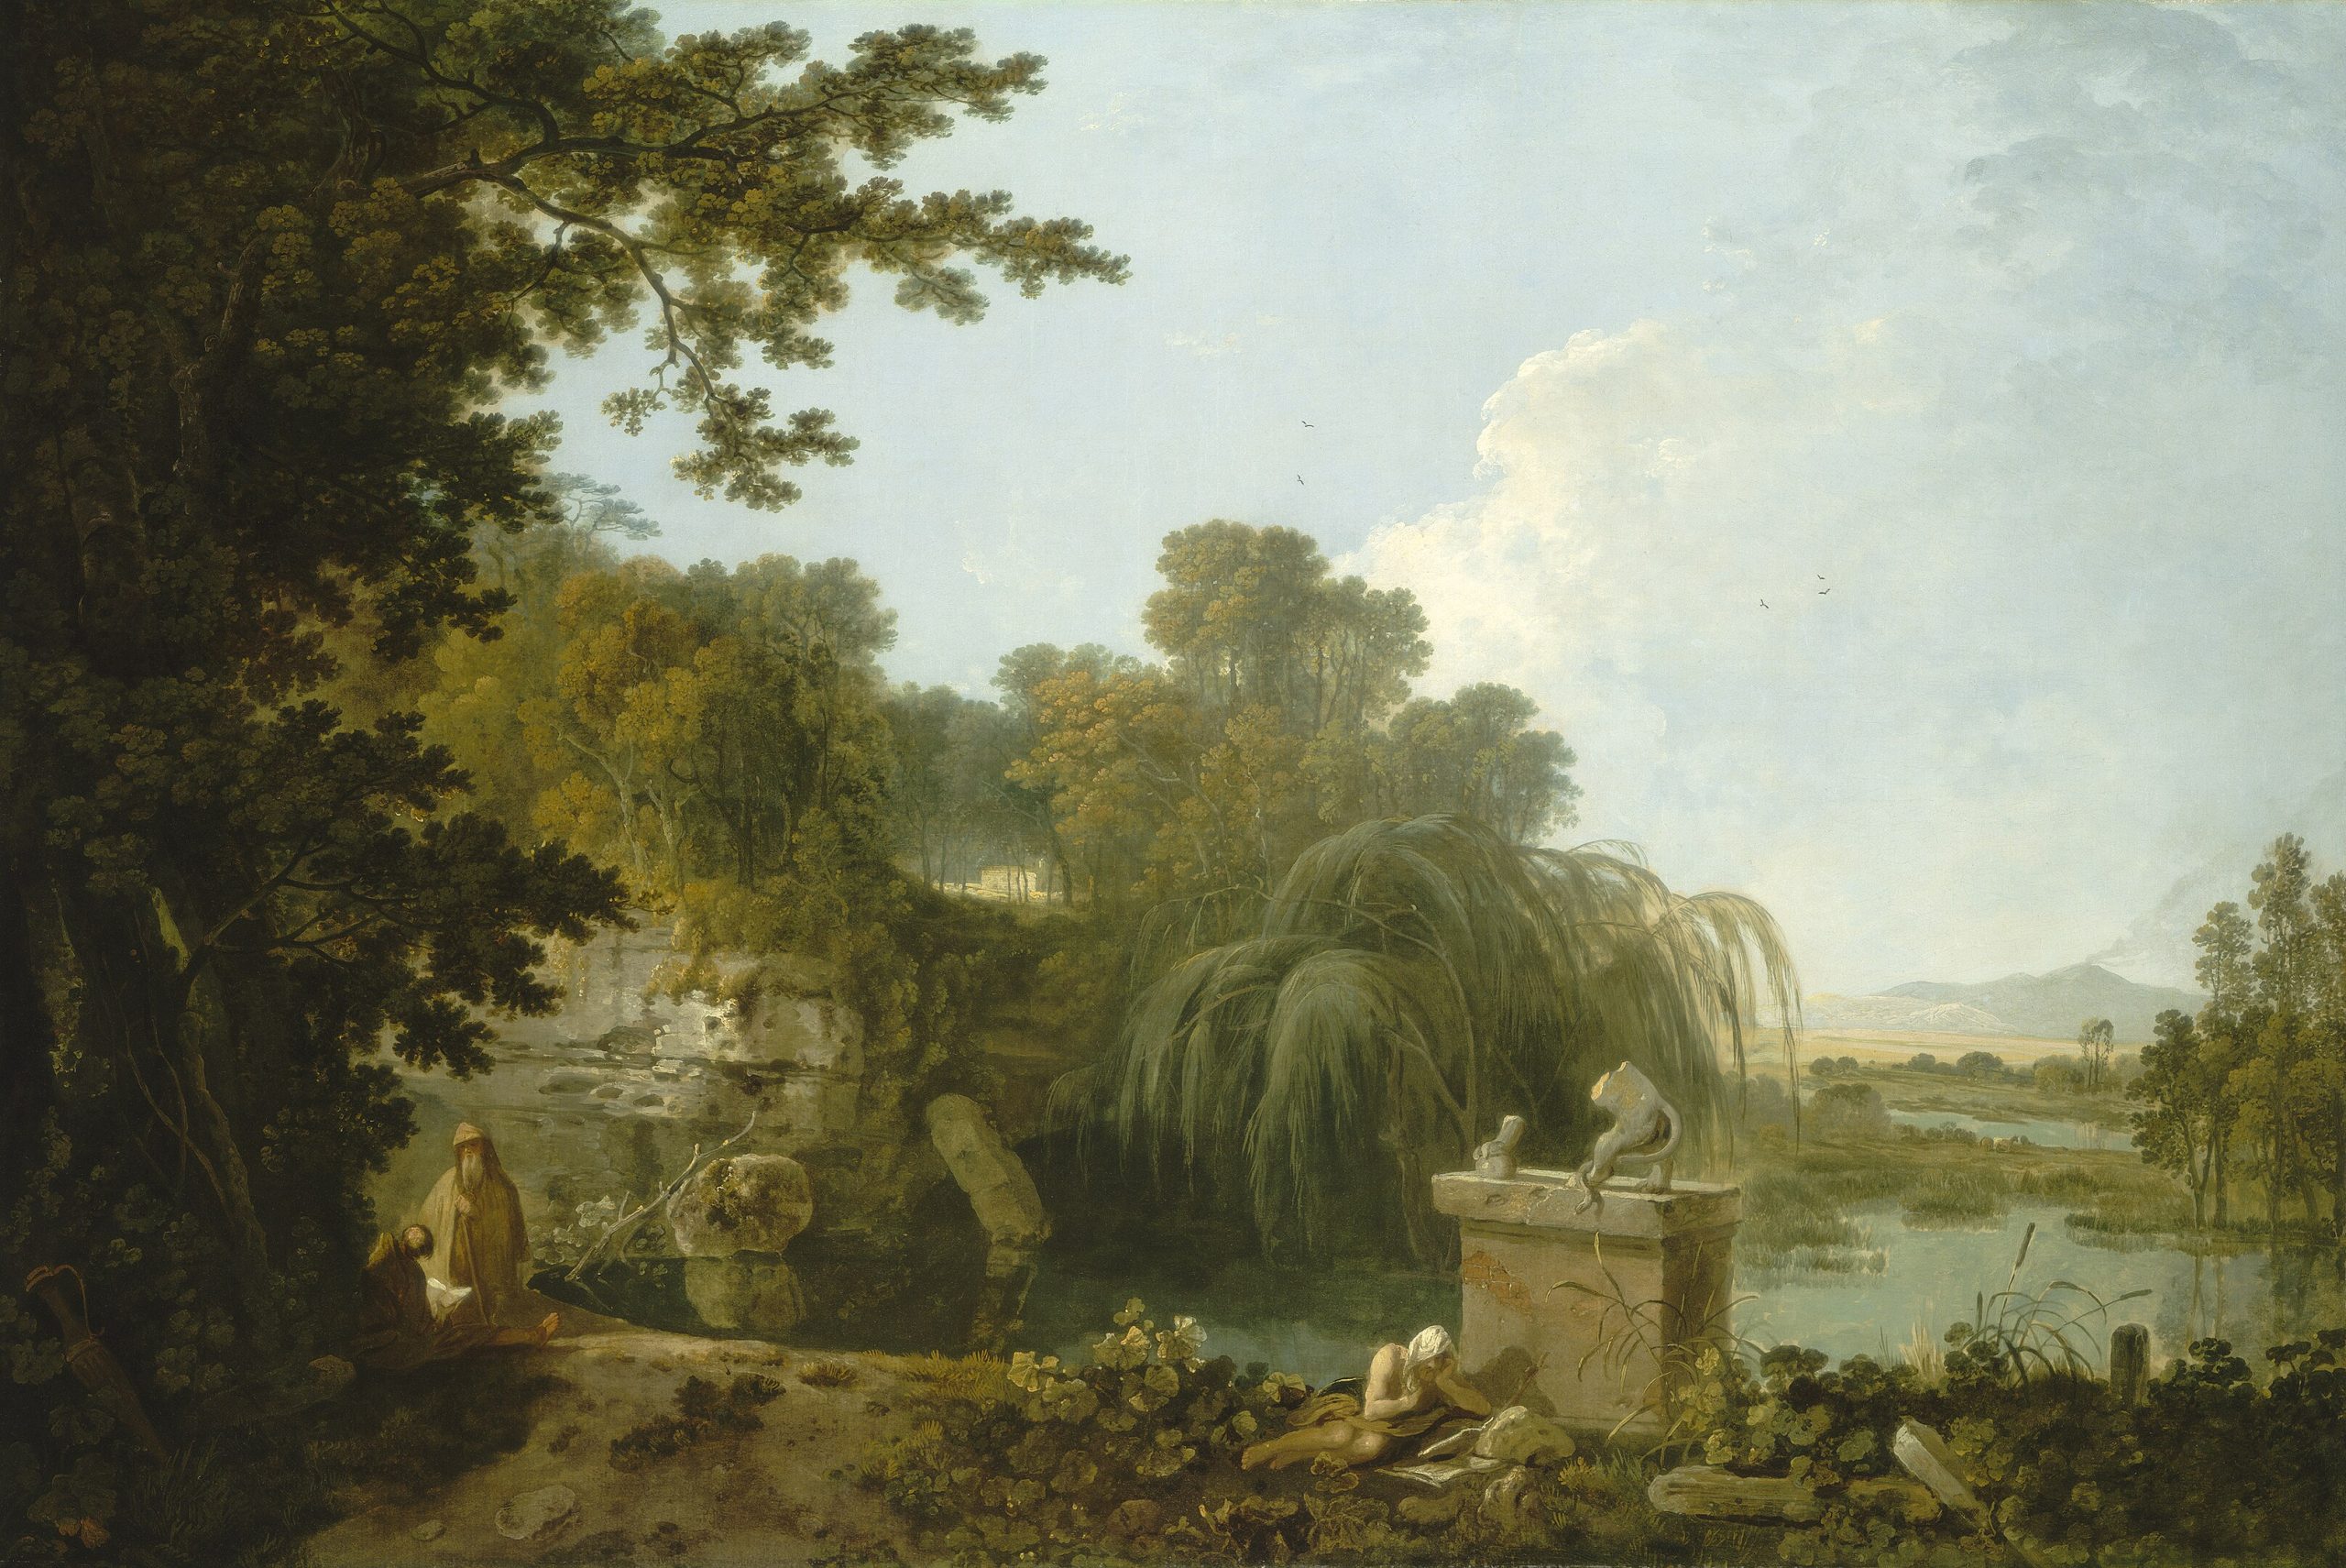 A landscape view of a forest with figures in the area